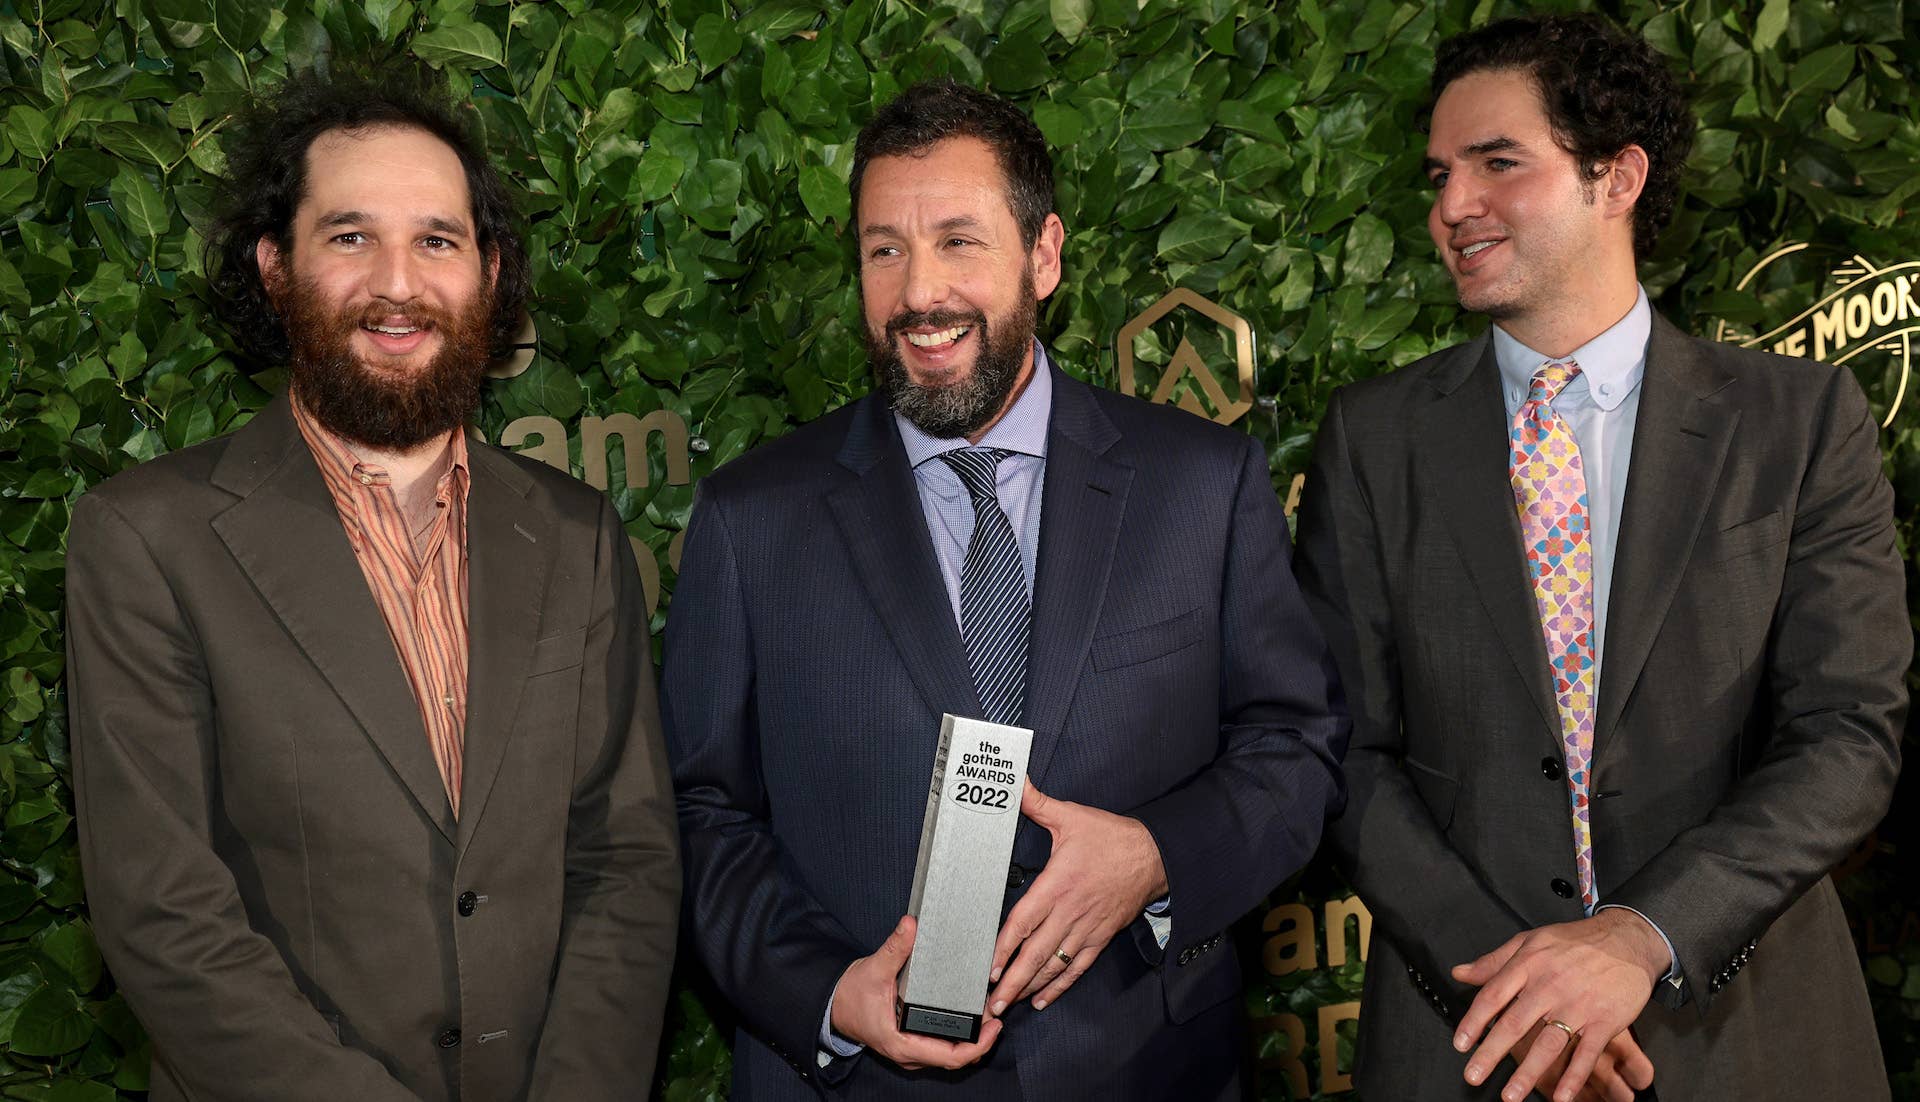 Adam Sandler and the Safdie Brothers on the red carpet